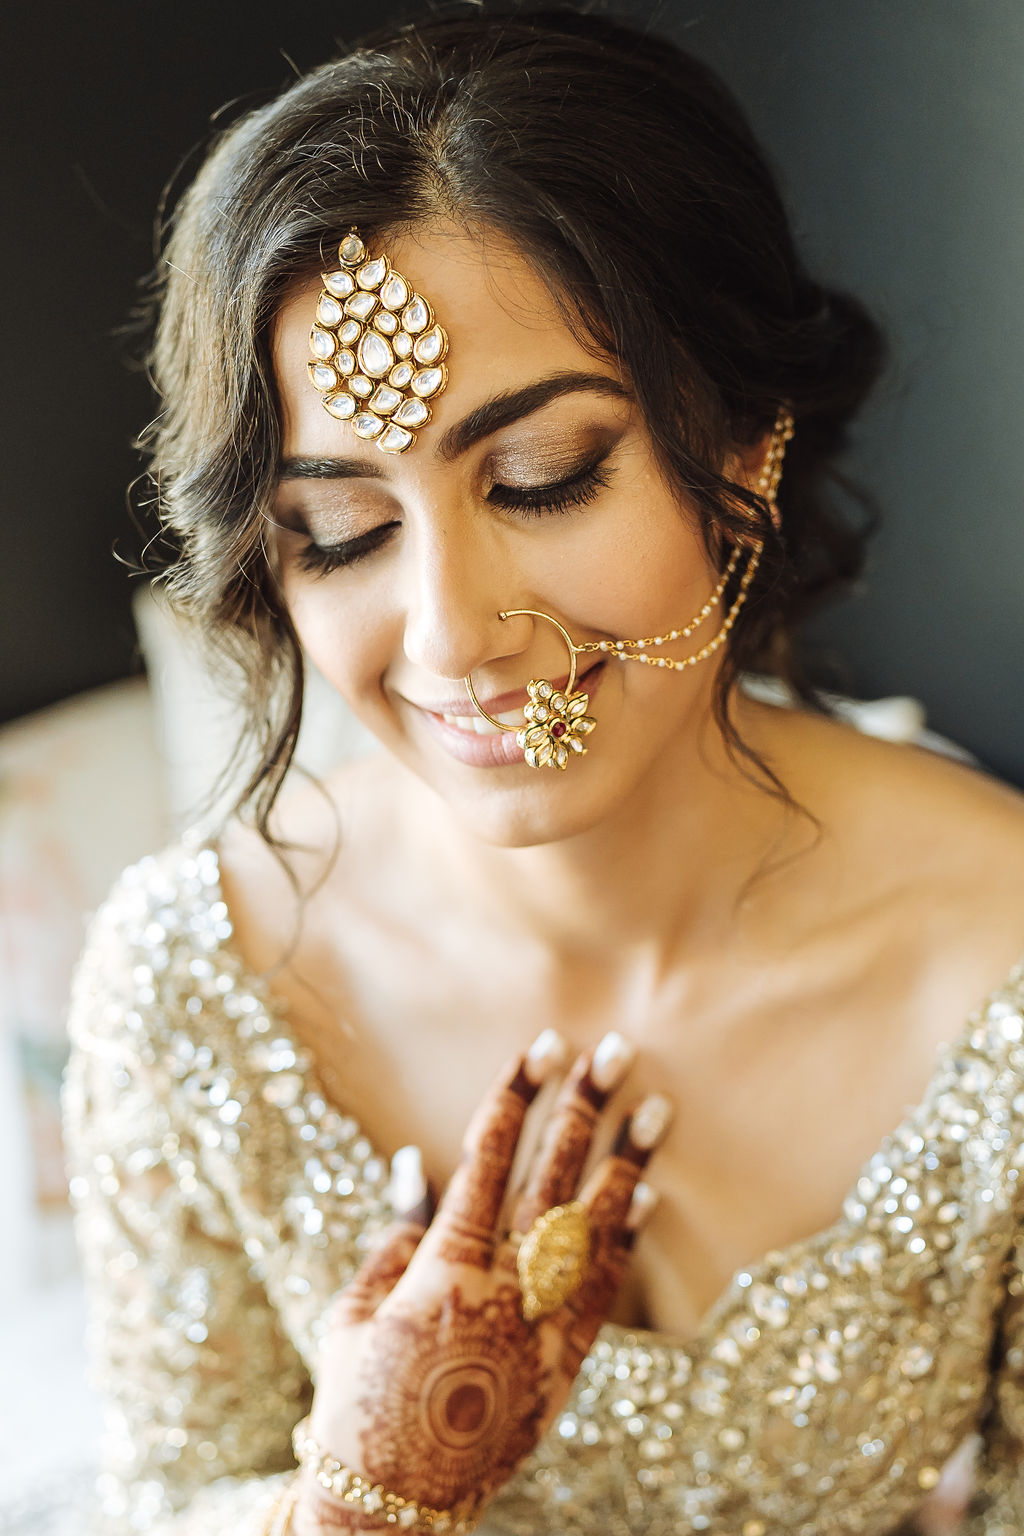 bride wearing embellished golden wedding saree, jewelry and henna sits in chair 